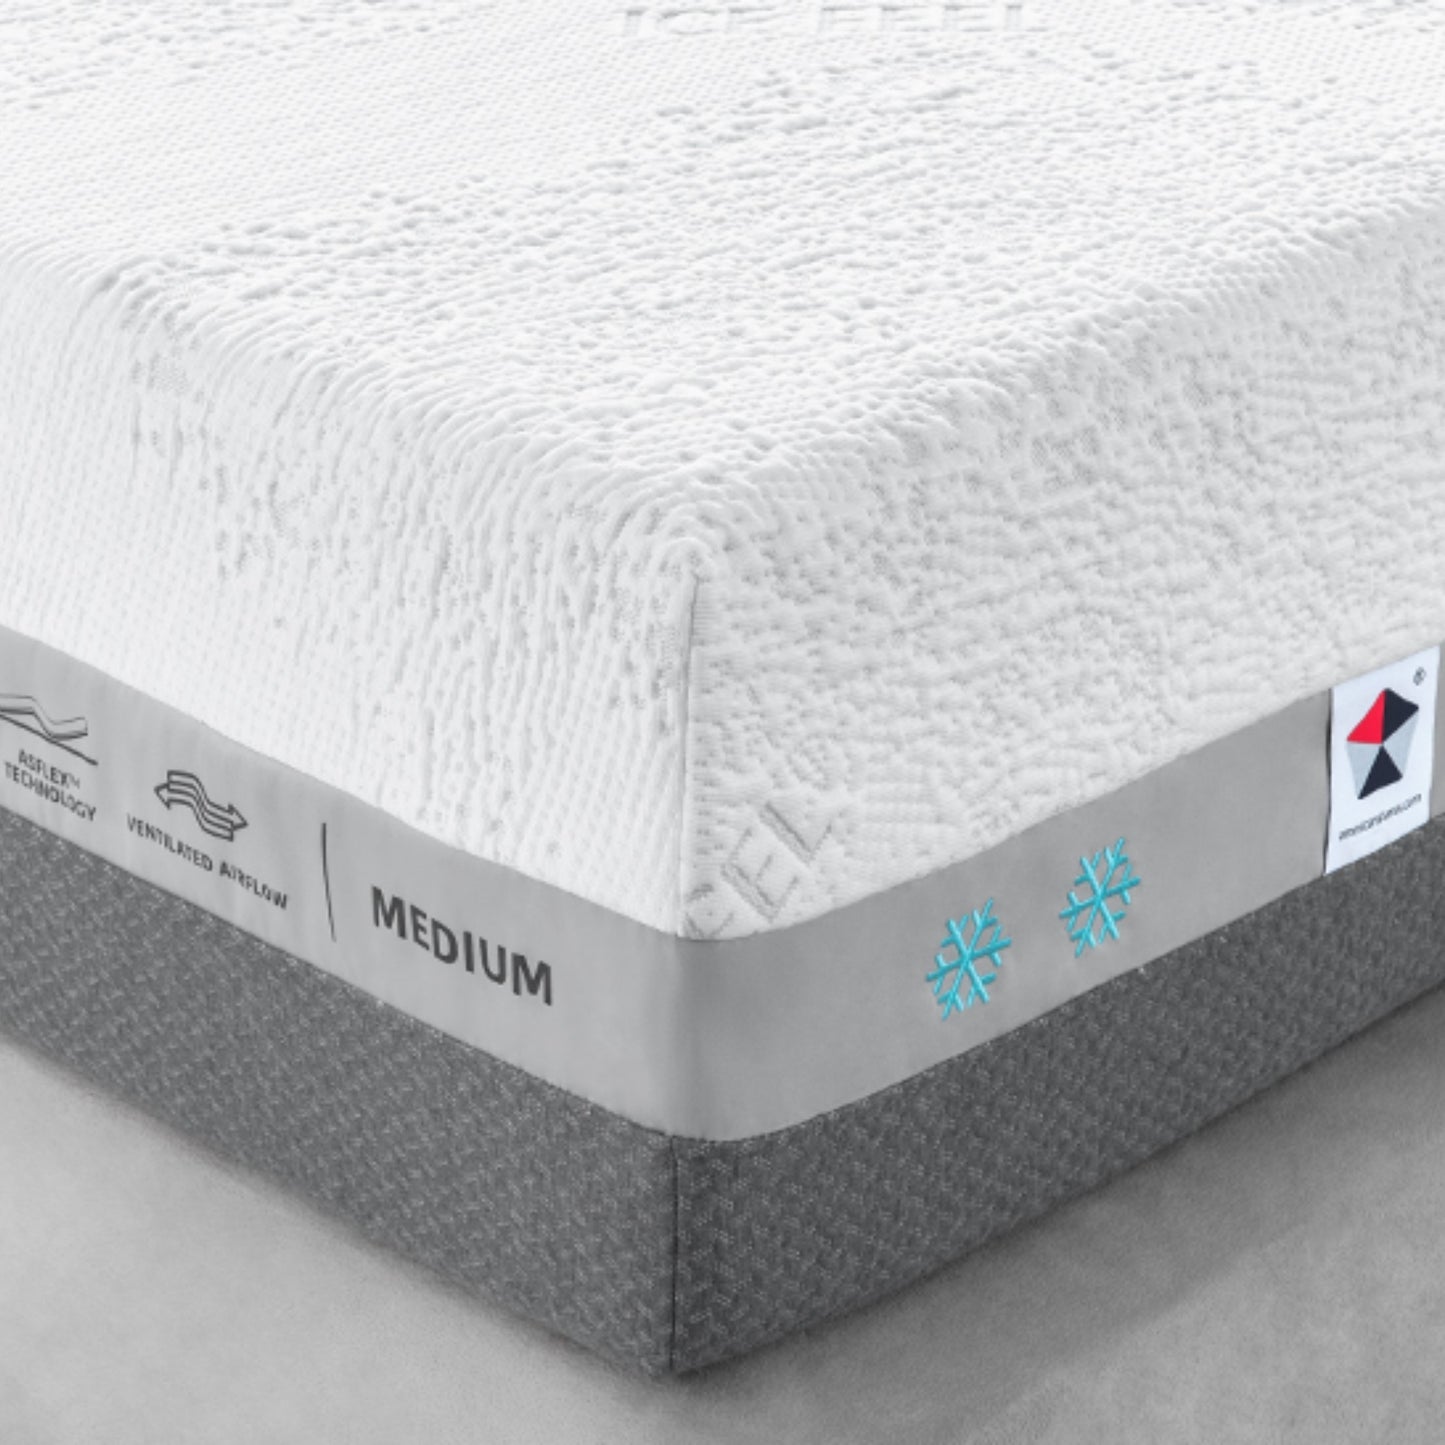 Primerest Ultra Mattress 12.5" Hybrid Max Gel Memory Foam with Ice Feel Cooling Knitted Fabric  Made in USA - King